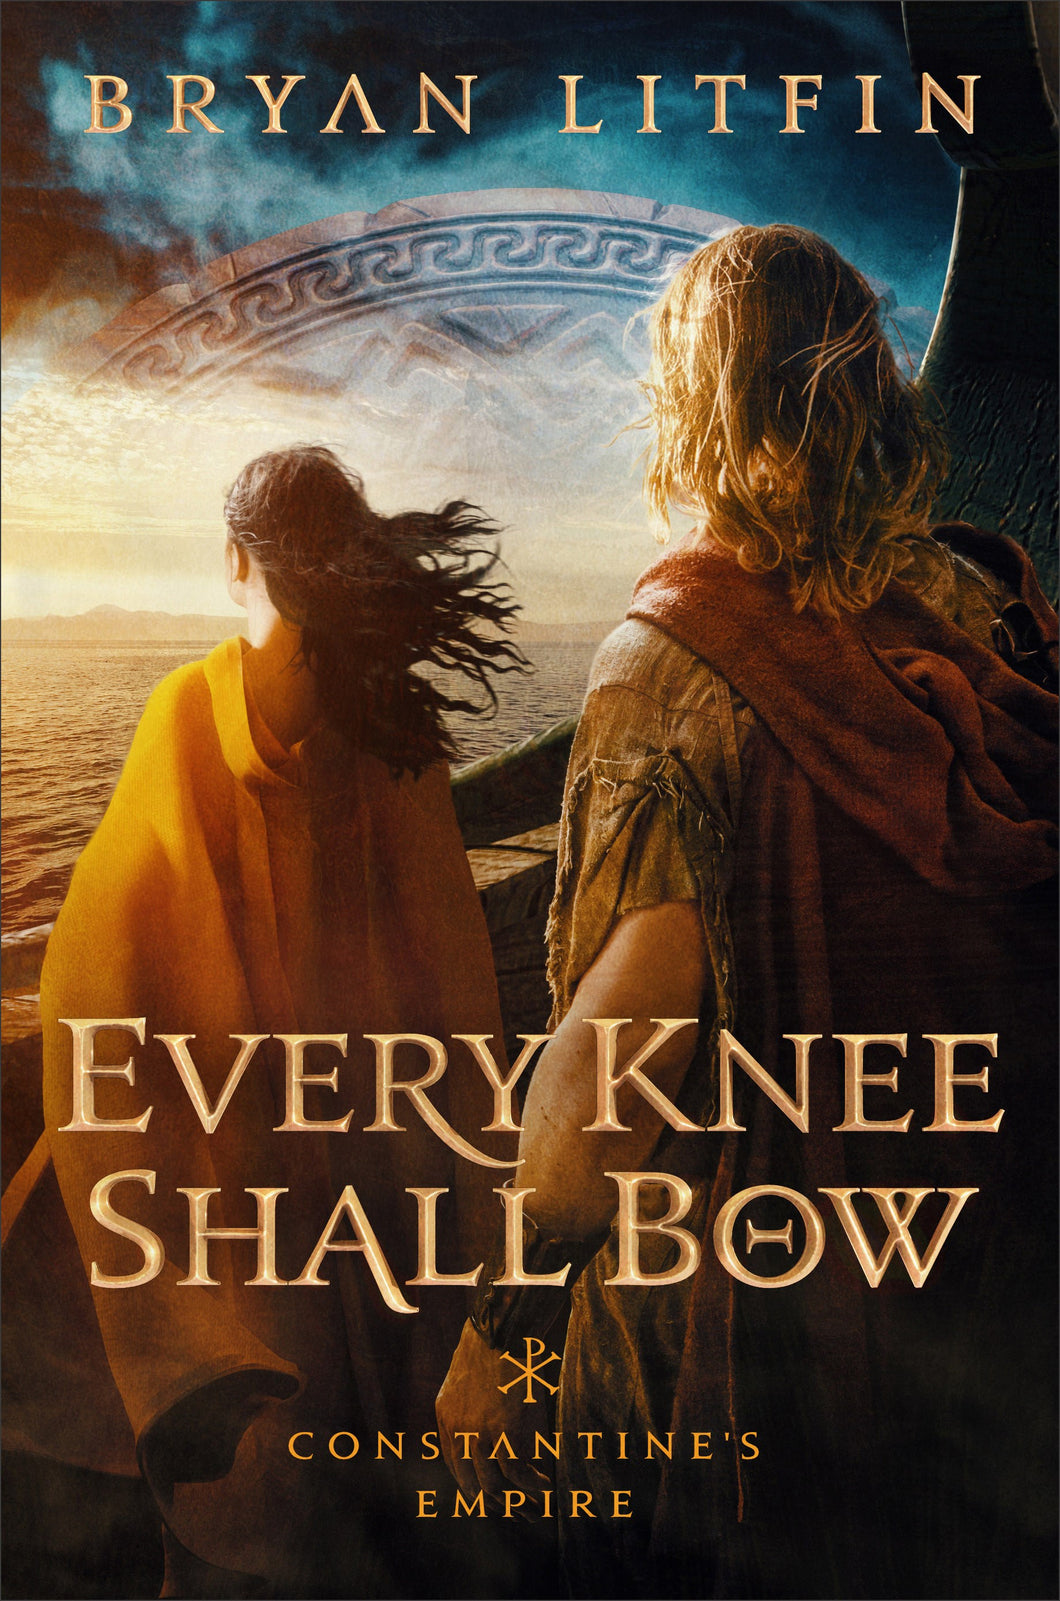 Every Knee Shall Bow (Constantine's Empire #2)